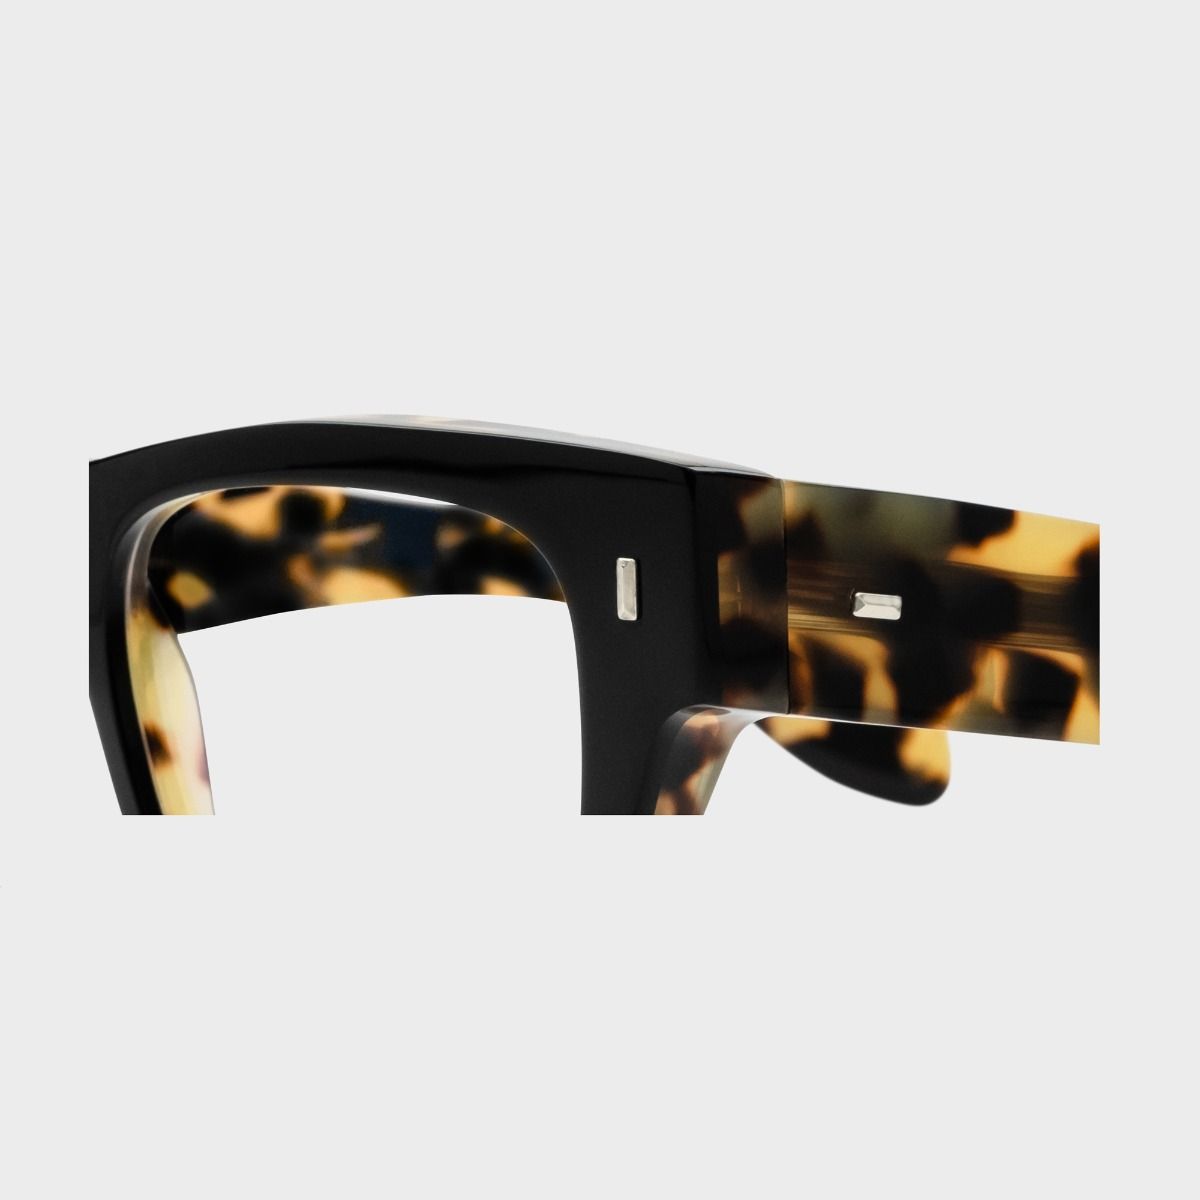 9692 Cutler and Gross, Optical Square Glasses - Black on Camo